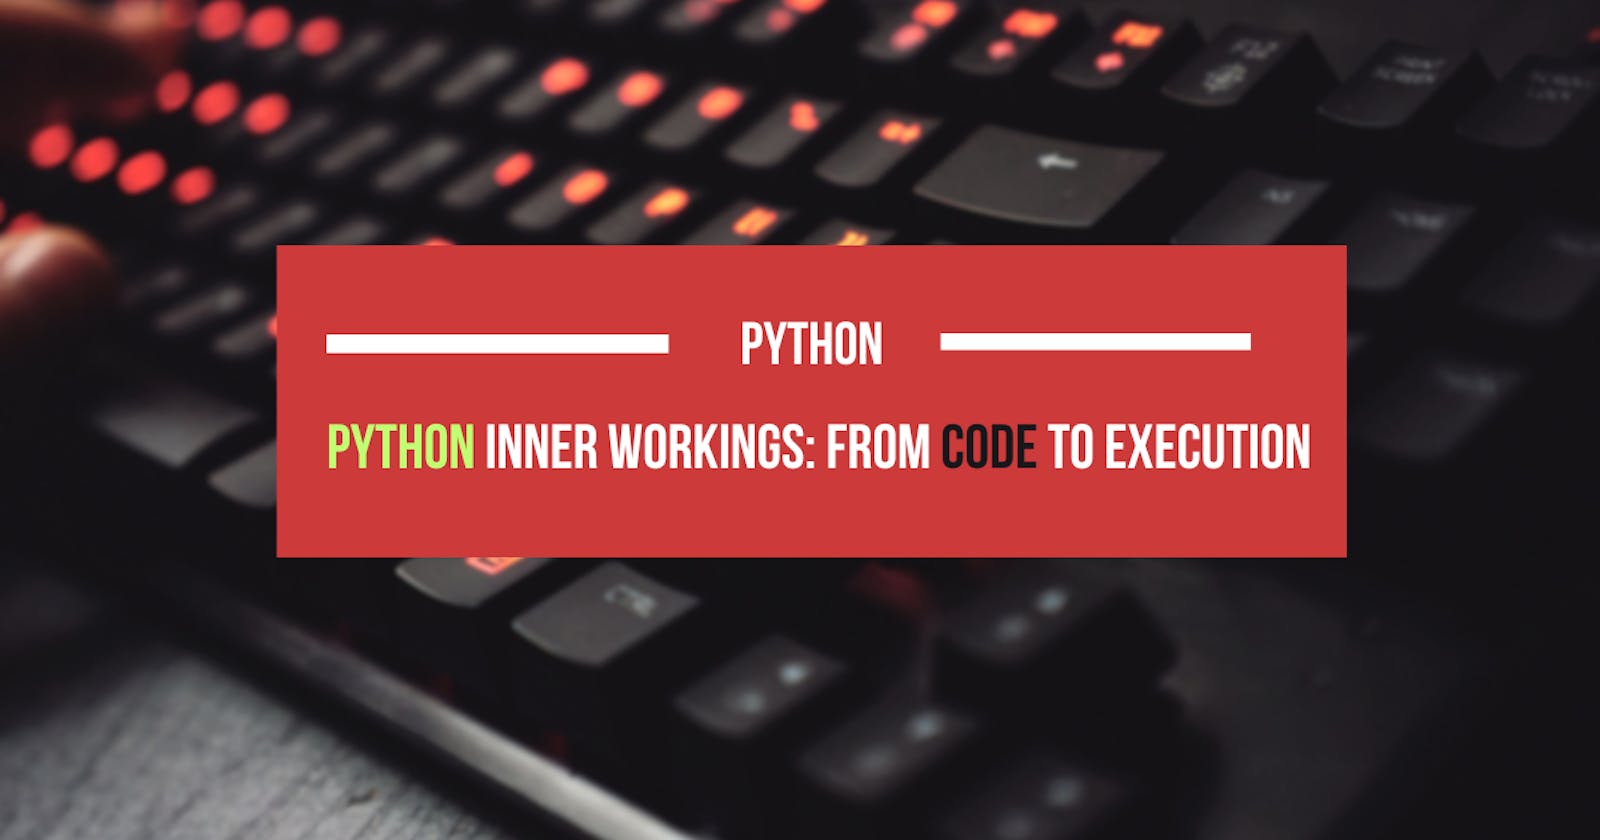 Python Inner Workings: From Code to Execution